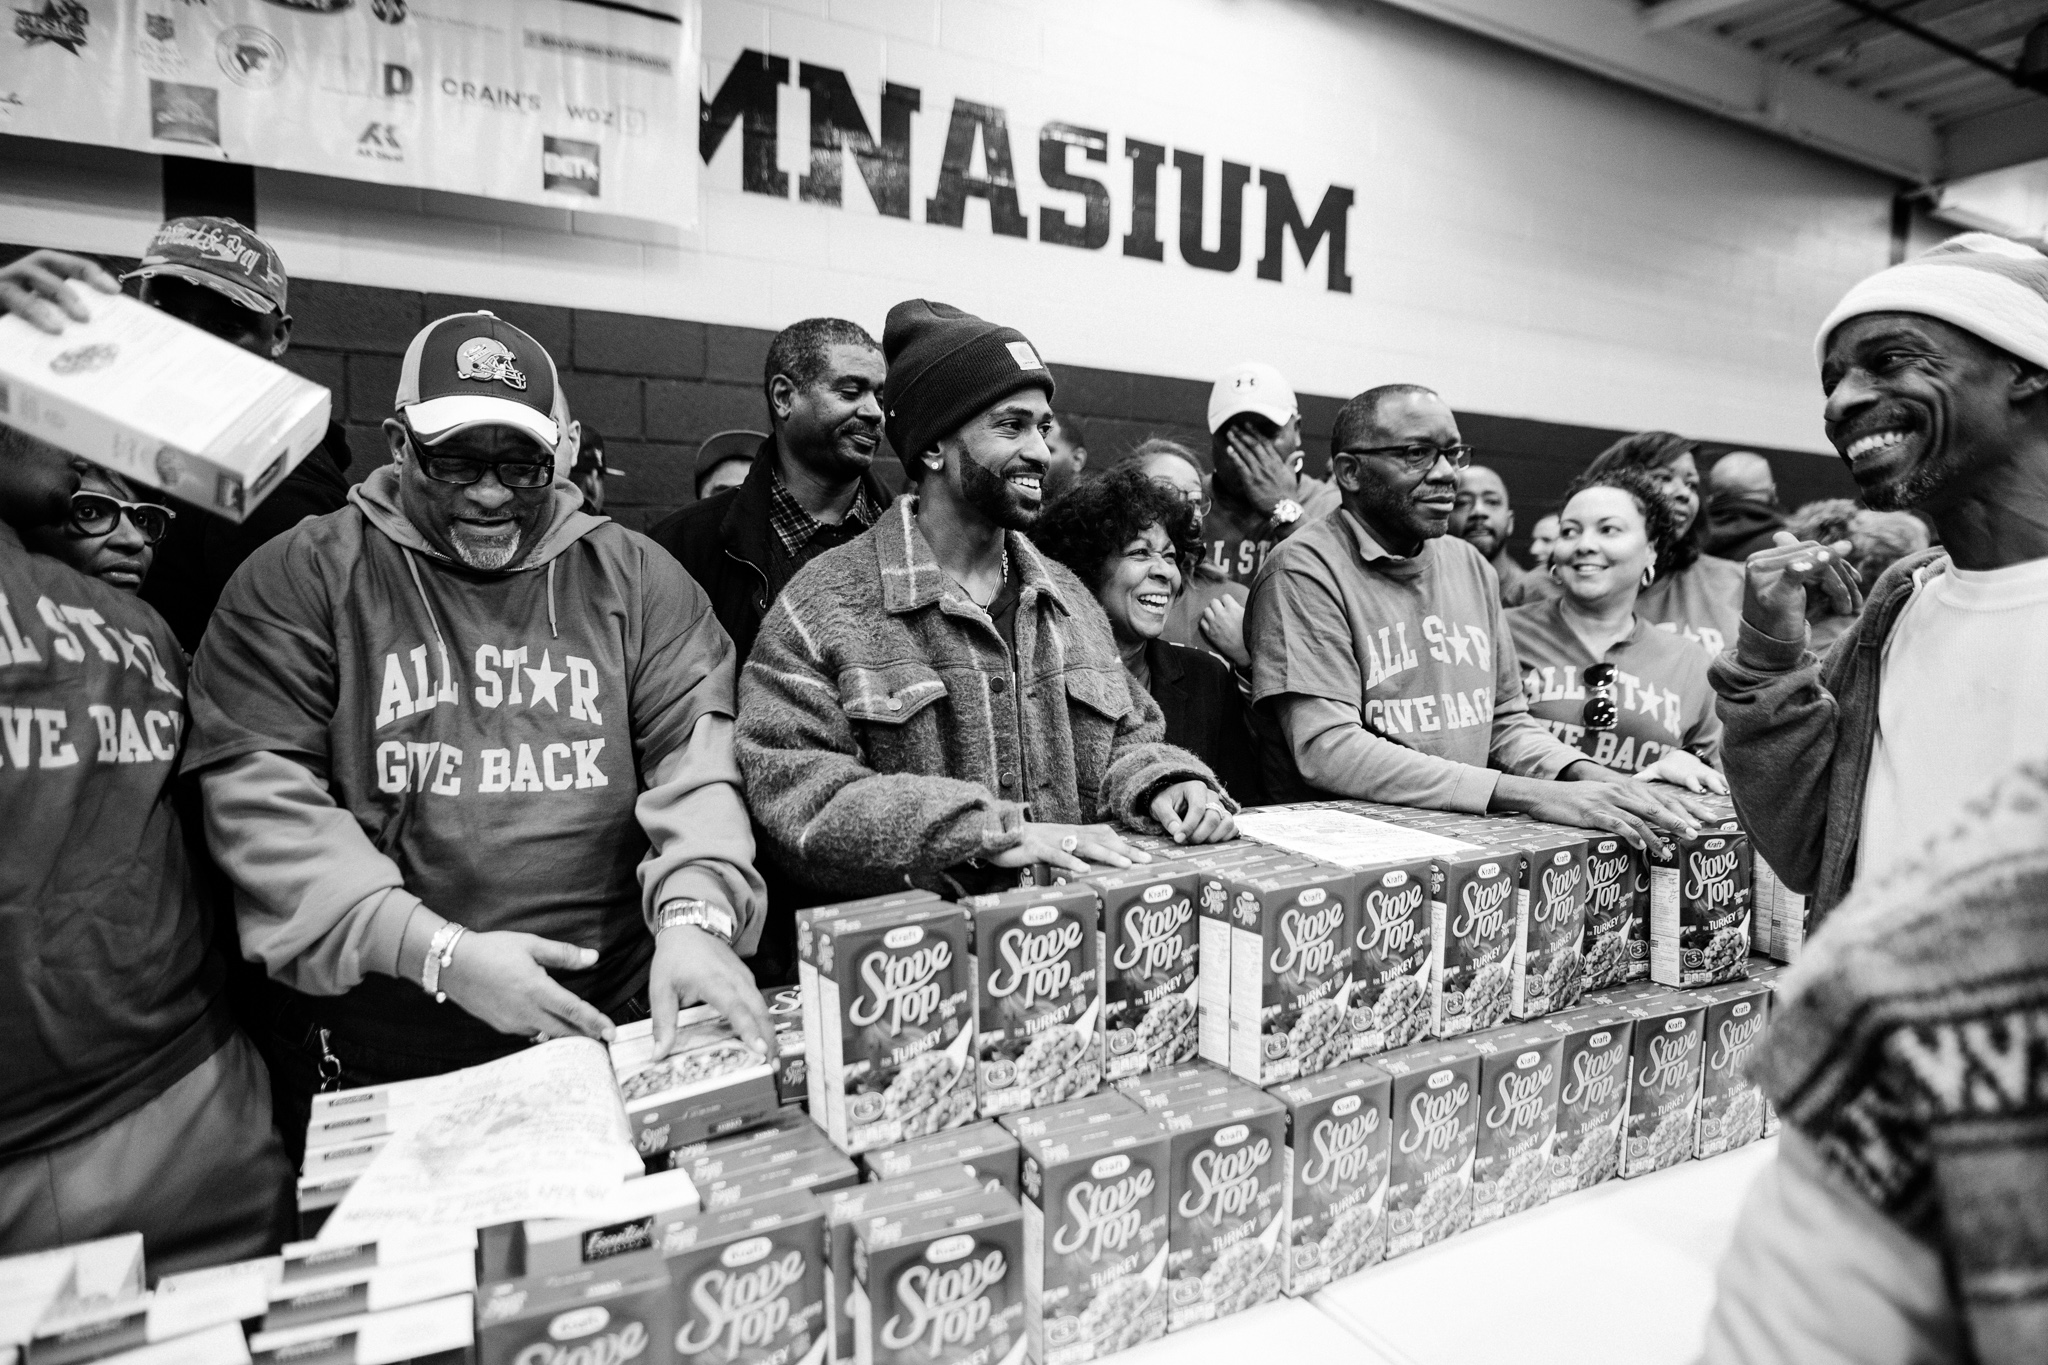 The Sean Anderson Foundation Returns as Sponsors to Help Distribute Over 6,500 Meals at the 2018 Thanksgiving All Star Give Back